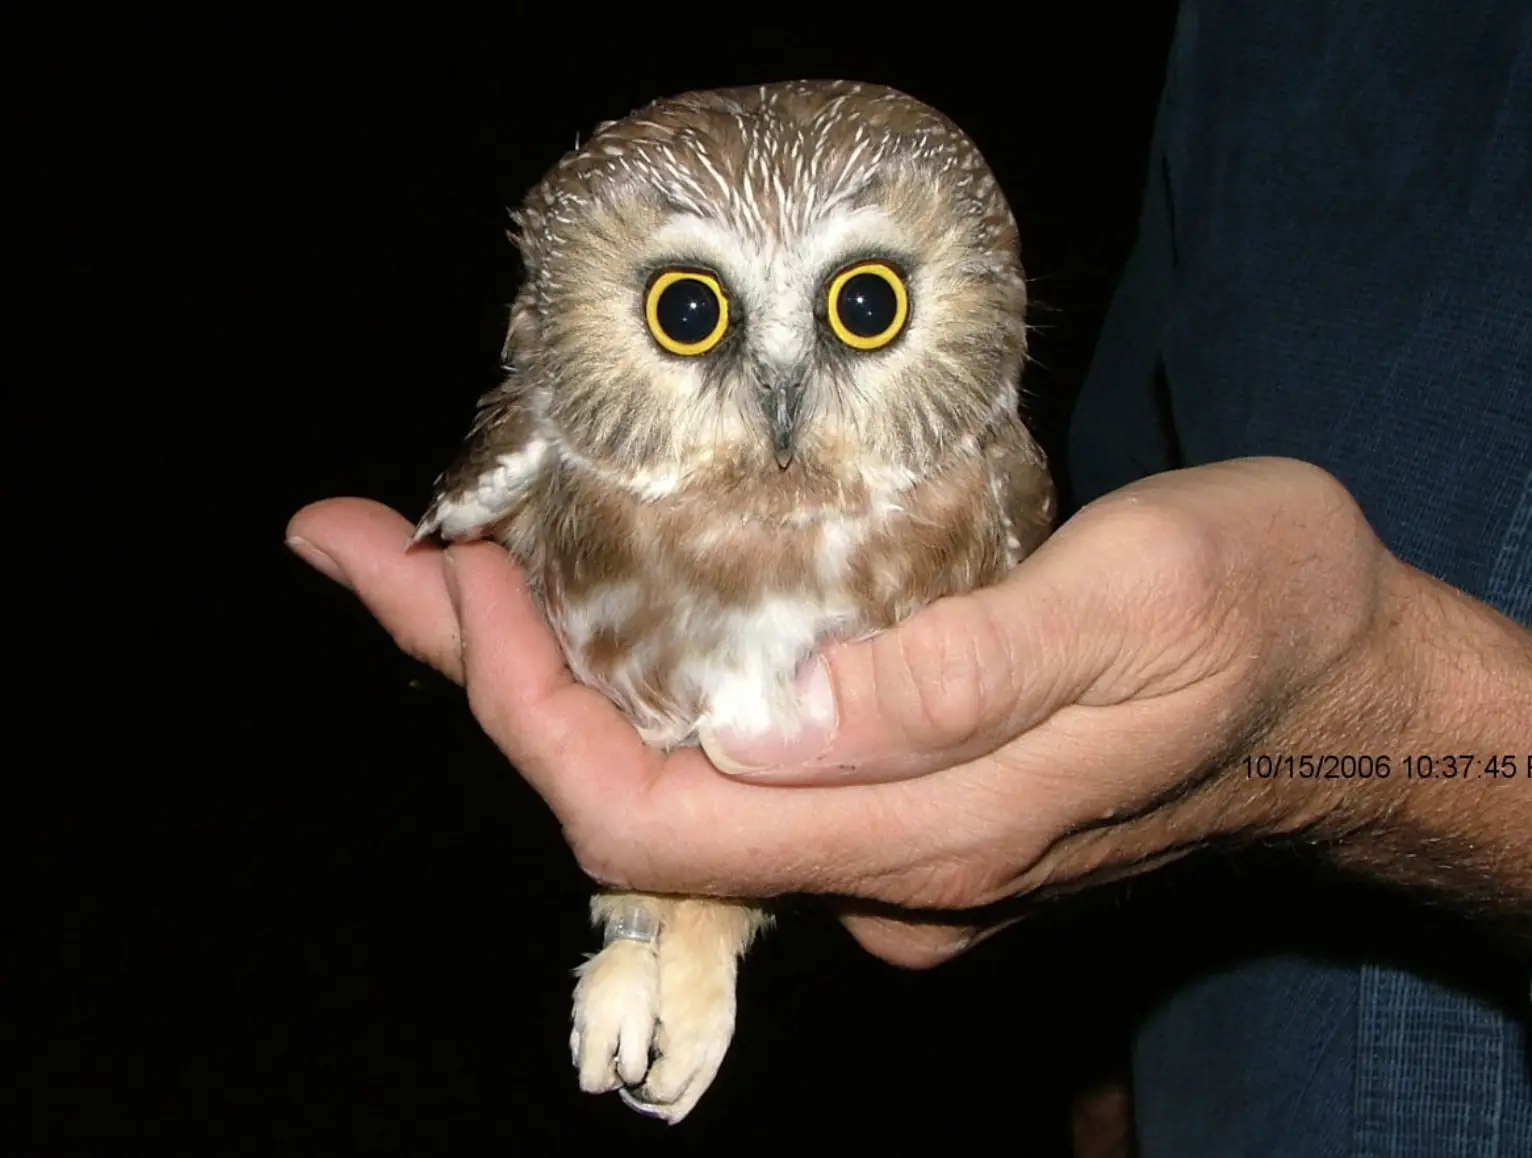 Weighing in at just over an ounce and standing about 5 to 6 inches tall, the Elf Owl could easily fit in the palm of your hand.